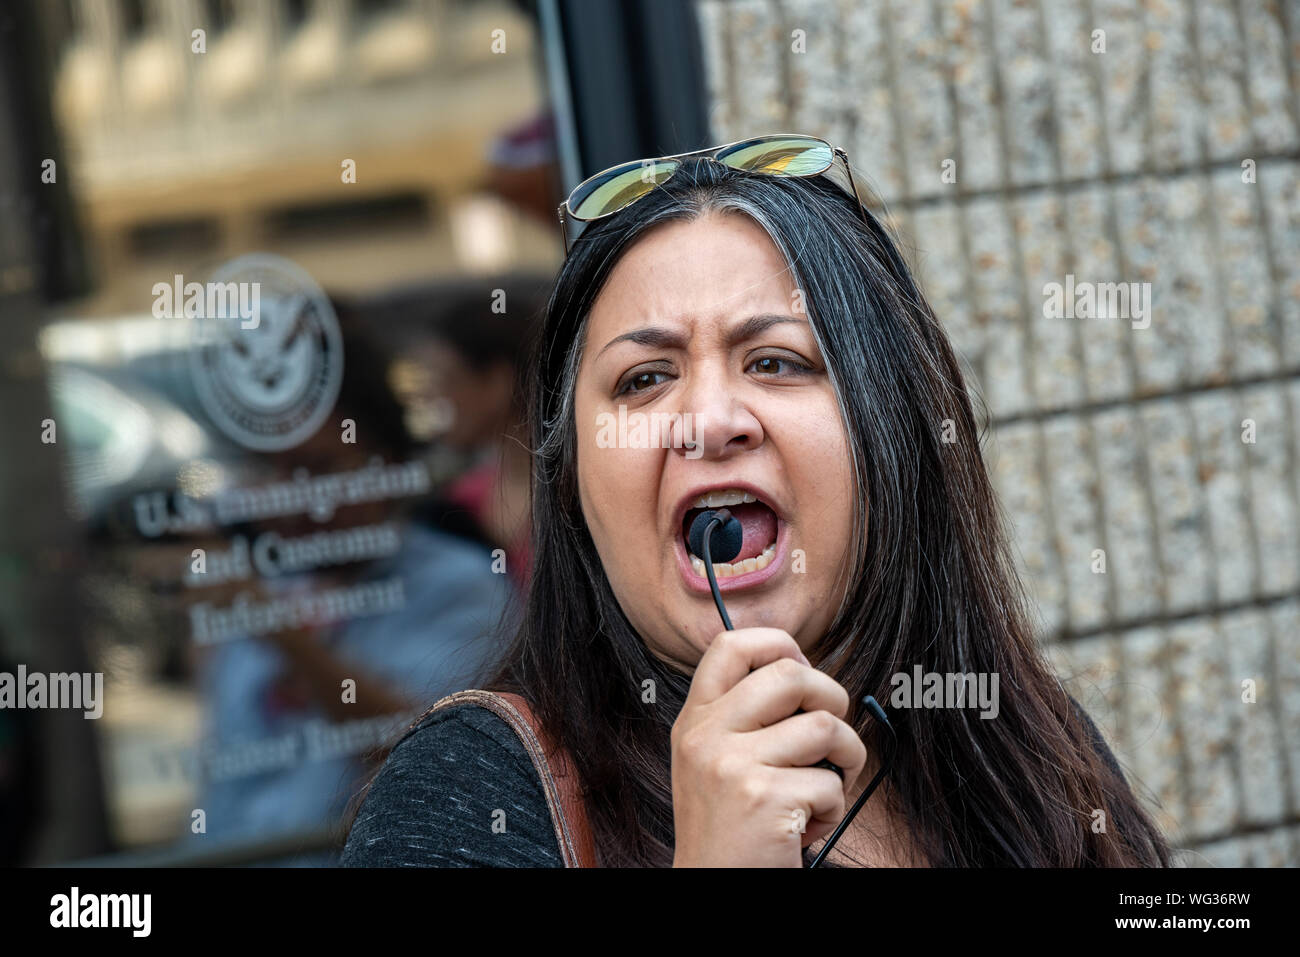 Philadelphia, Pennsylvania, USA. 27 August, 2019. Philadelphia residents gathered in protest of the Trump administrations decision to increase indefinite detention for migrants. About two dozen rallied at the DHS Immigration office at 8th and Arch street finishing with an anime-inspired 'Naruto Run'. Credit: Chris Baker Evens/Alamy Live News. Stock Photo